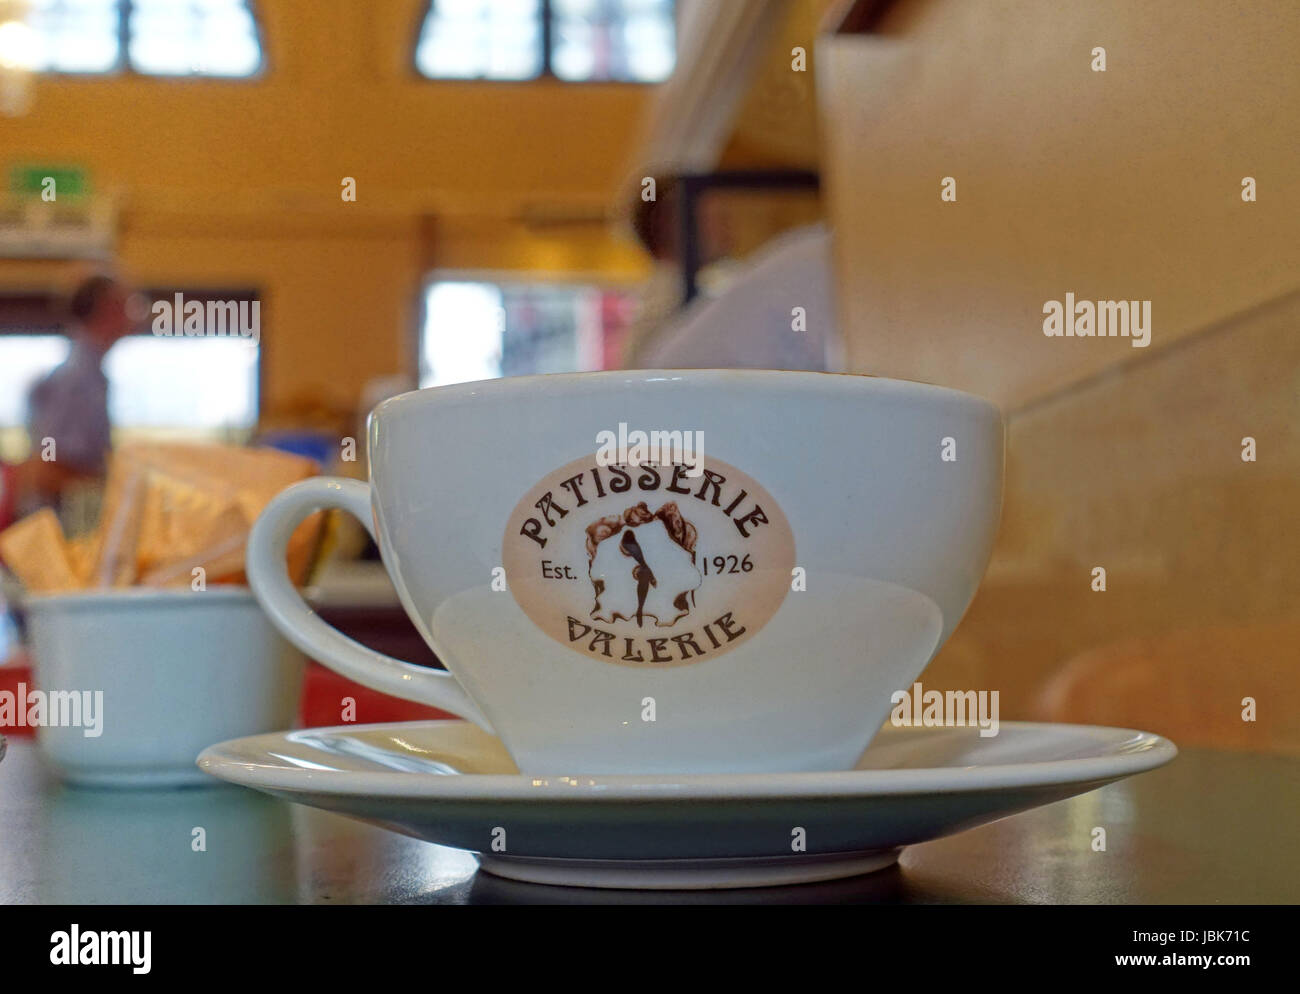 Coffee cup in branch of Patisserie Valerie, London Stock Photo